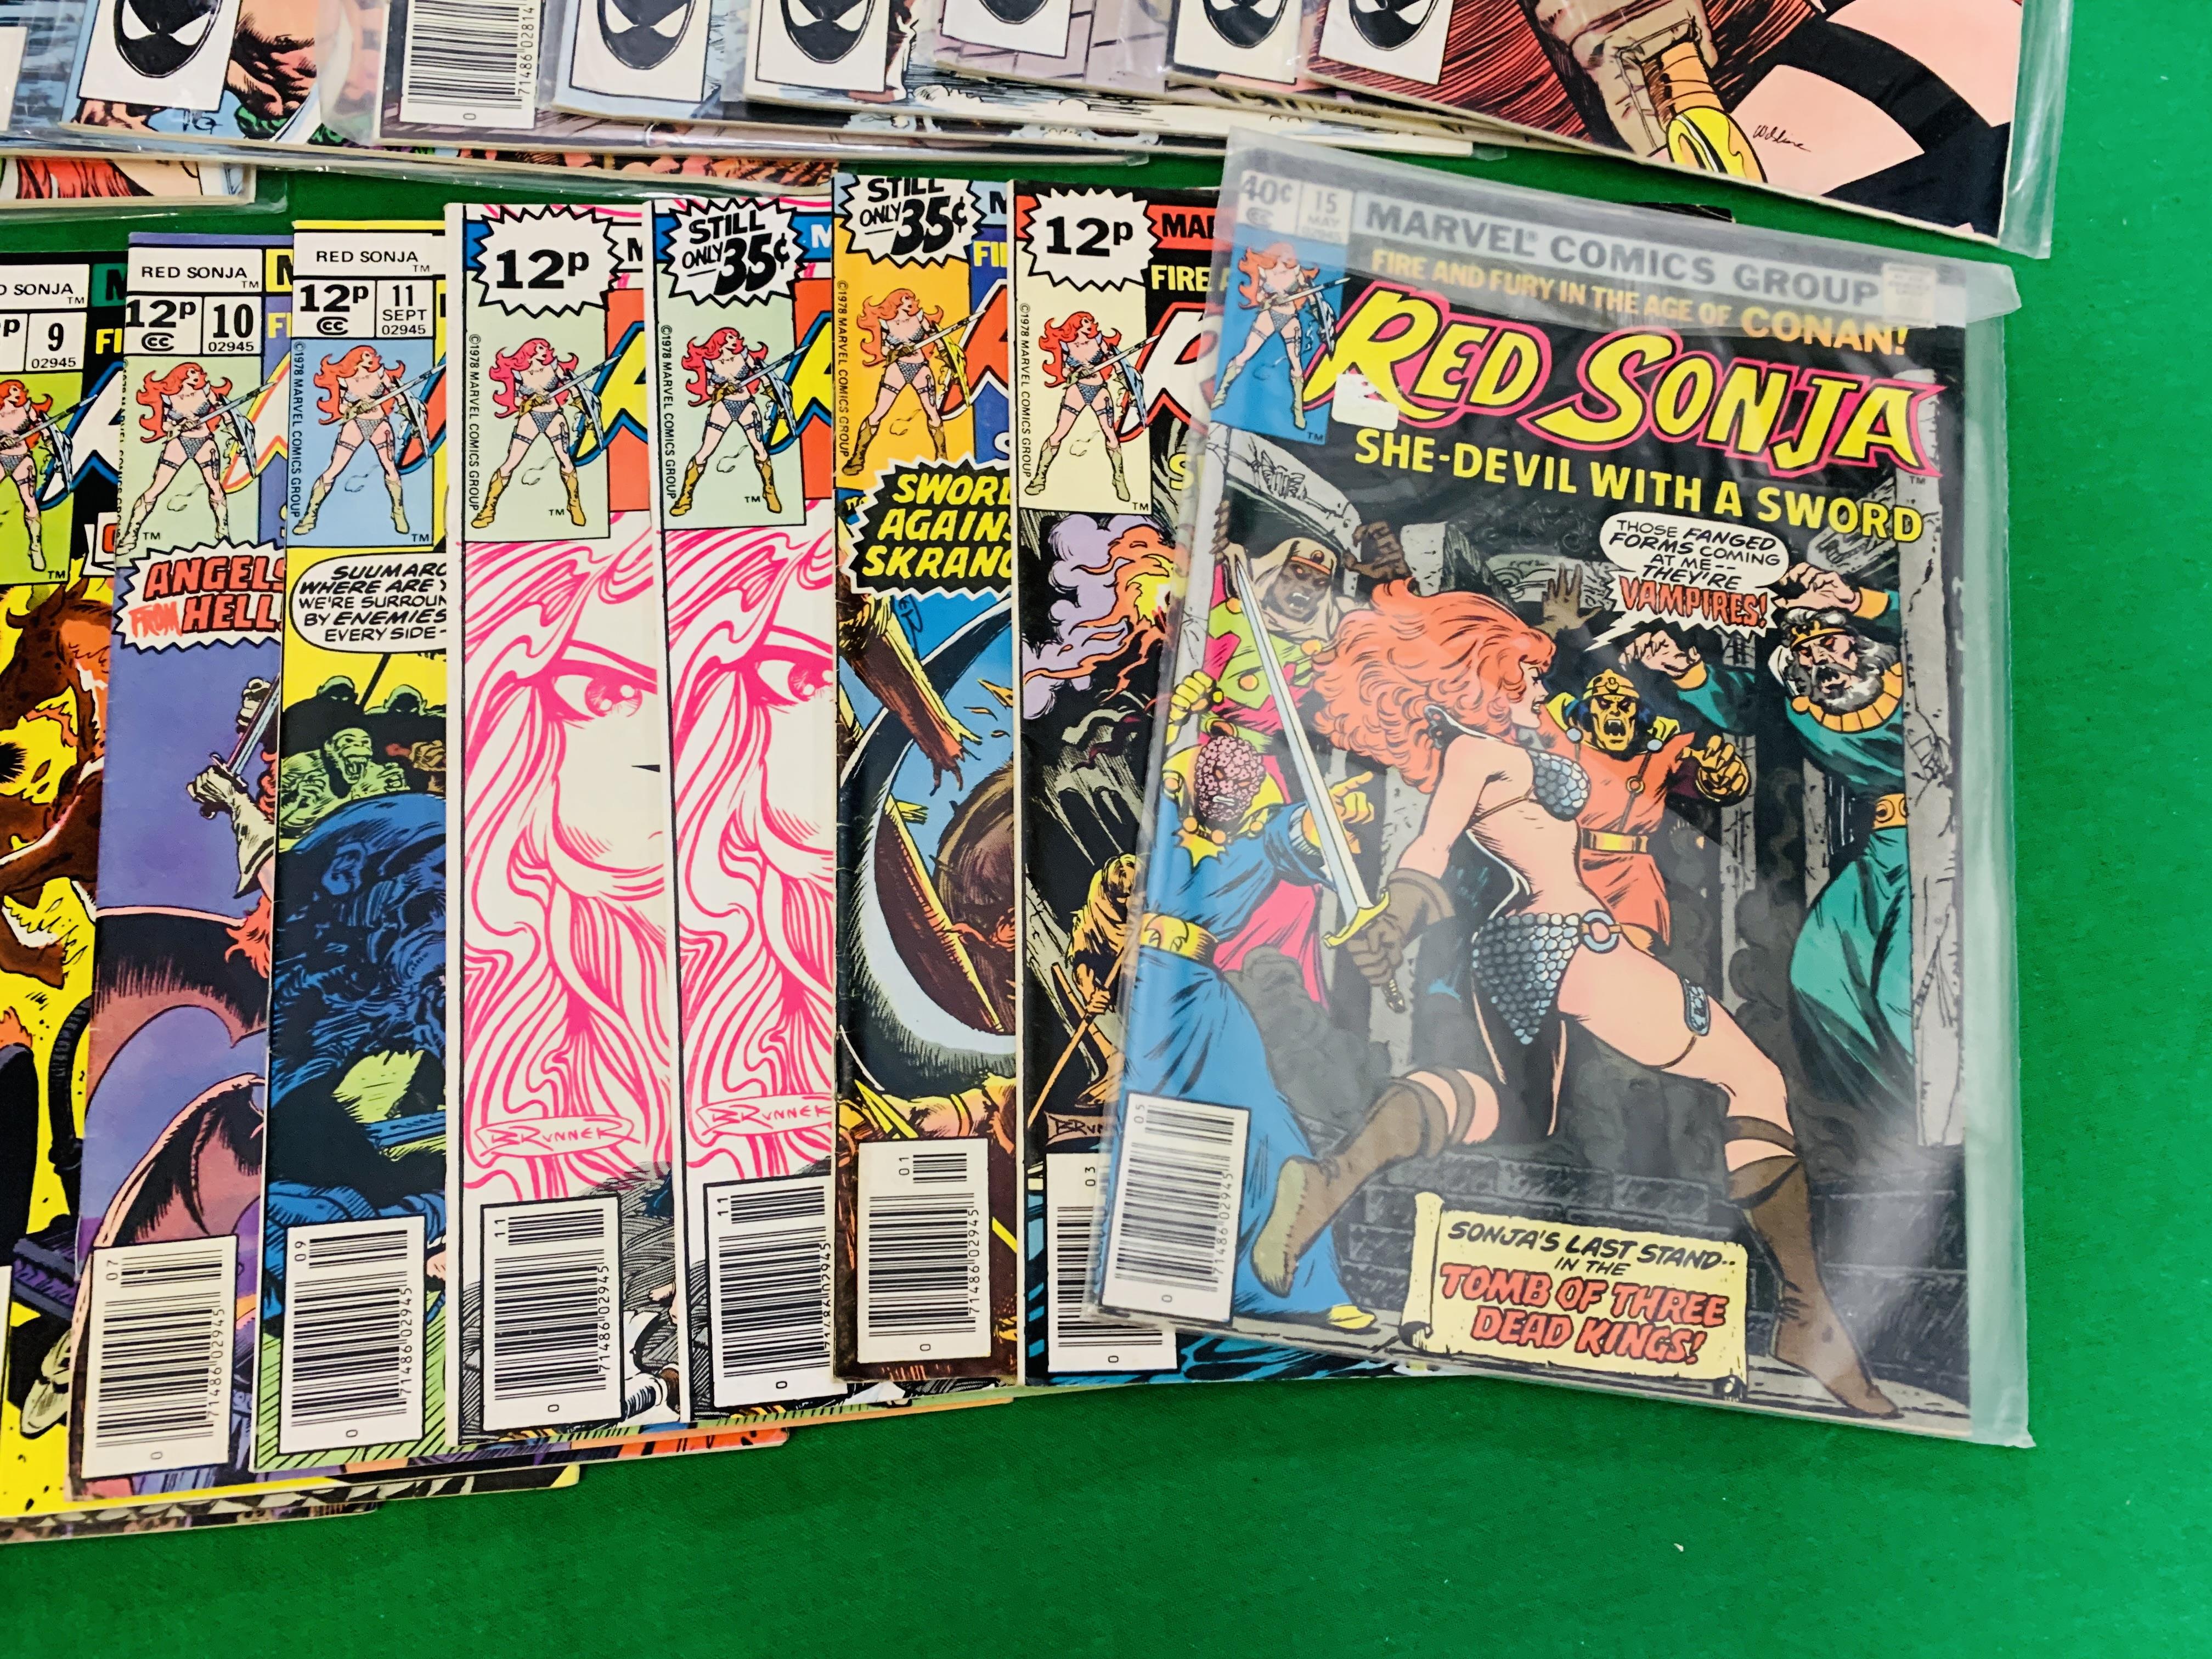 MARVEL COMICS RED SONJA NO. 1 - 15 FROM 1977 AND NO. 1 - 13 FROM 1983, INCLUDING OTHER APPEARANCES. - Image 4 of 8